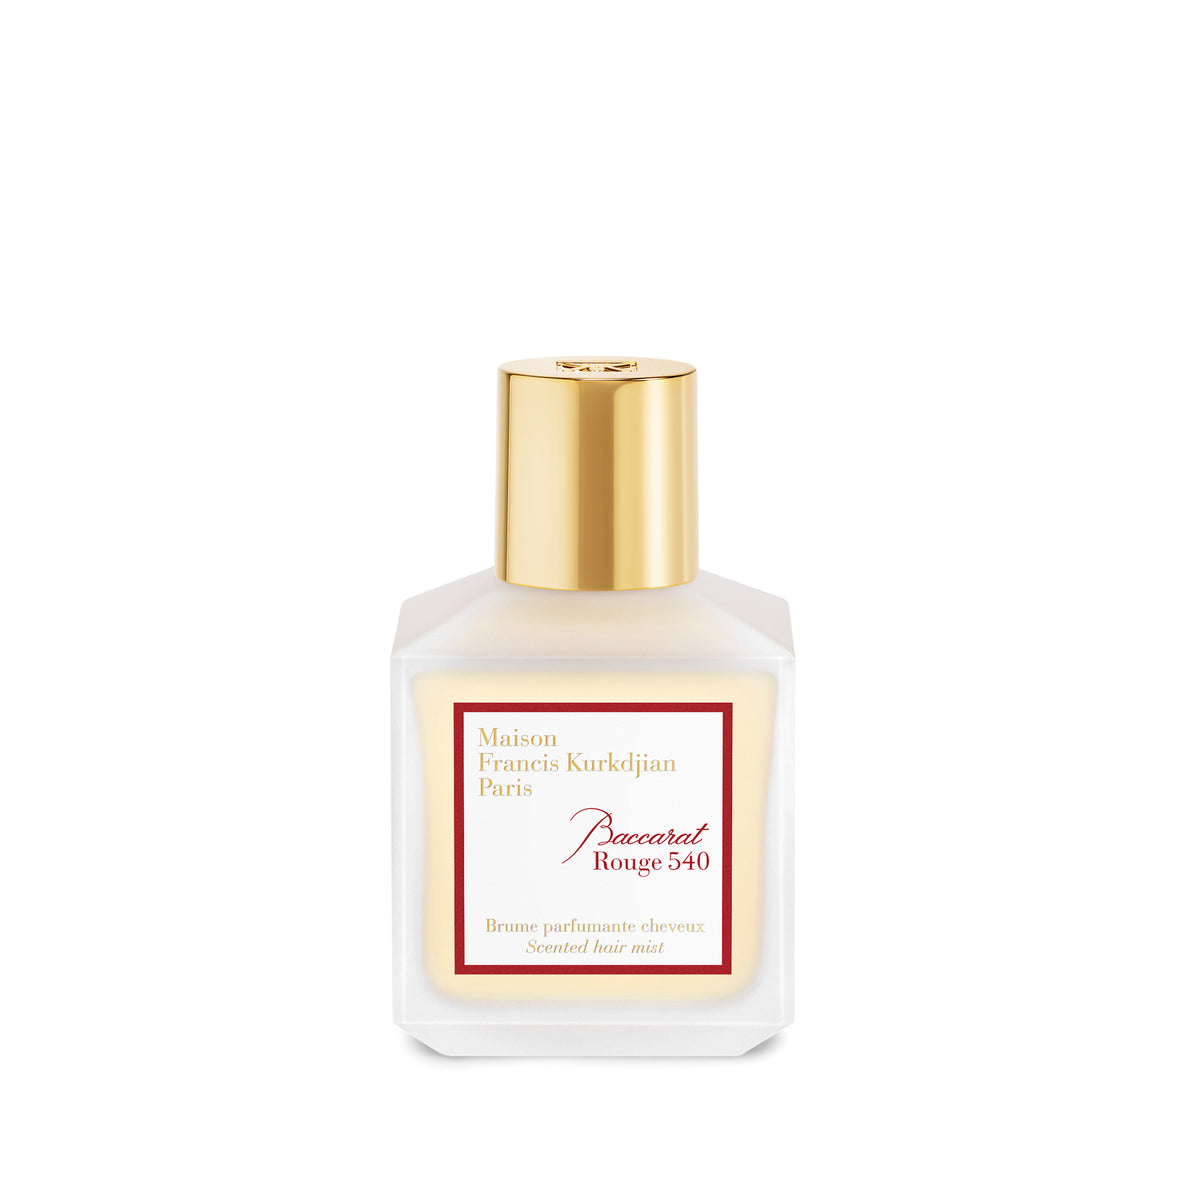 Alternate Image of  Baccarat Rouge EDP 540 Scented Hair Mist